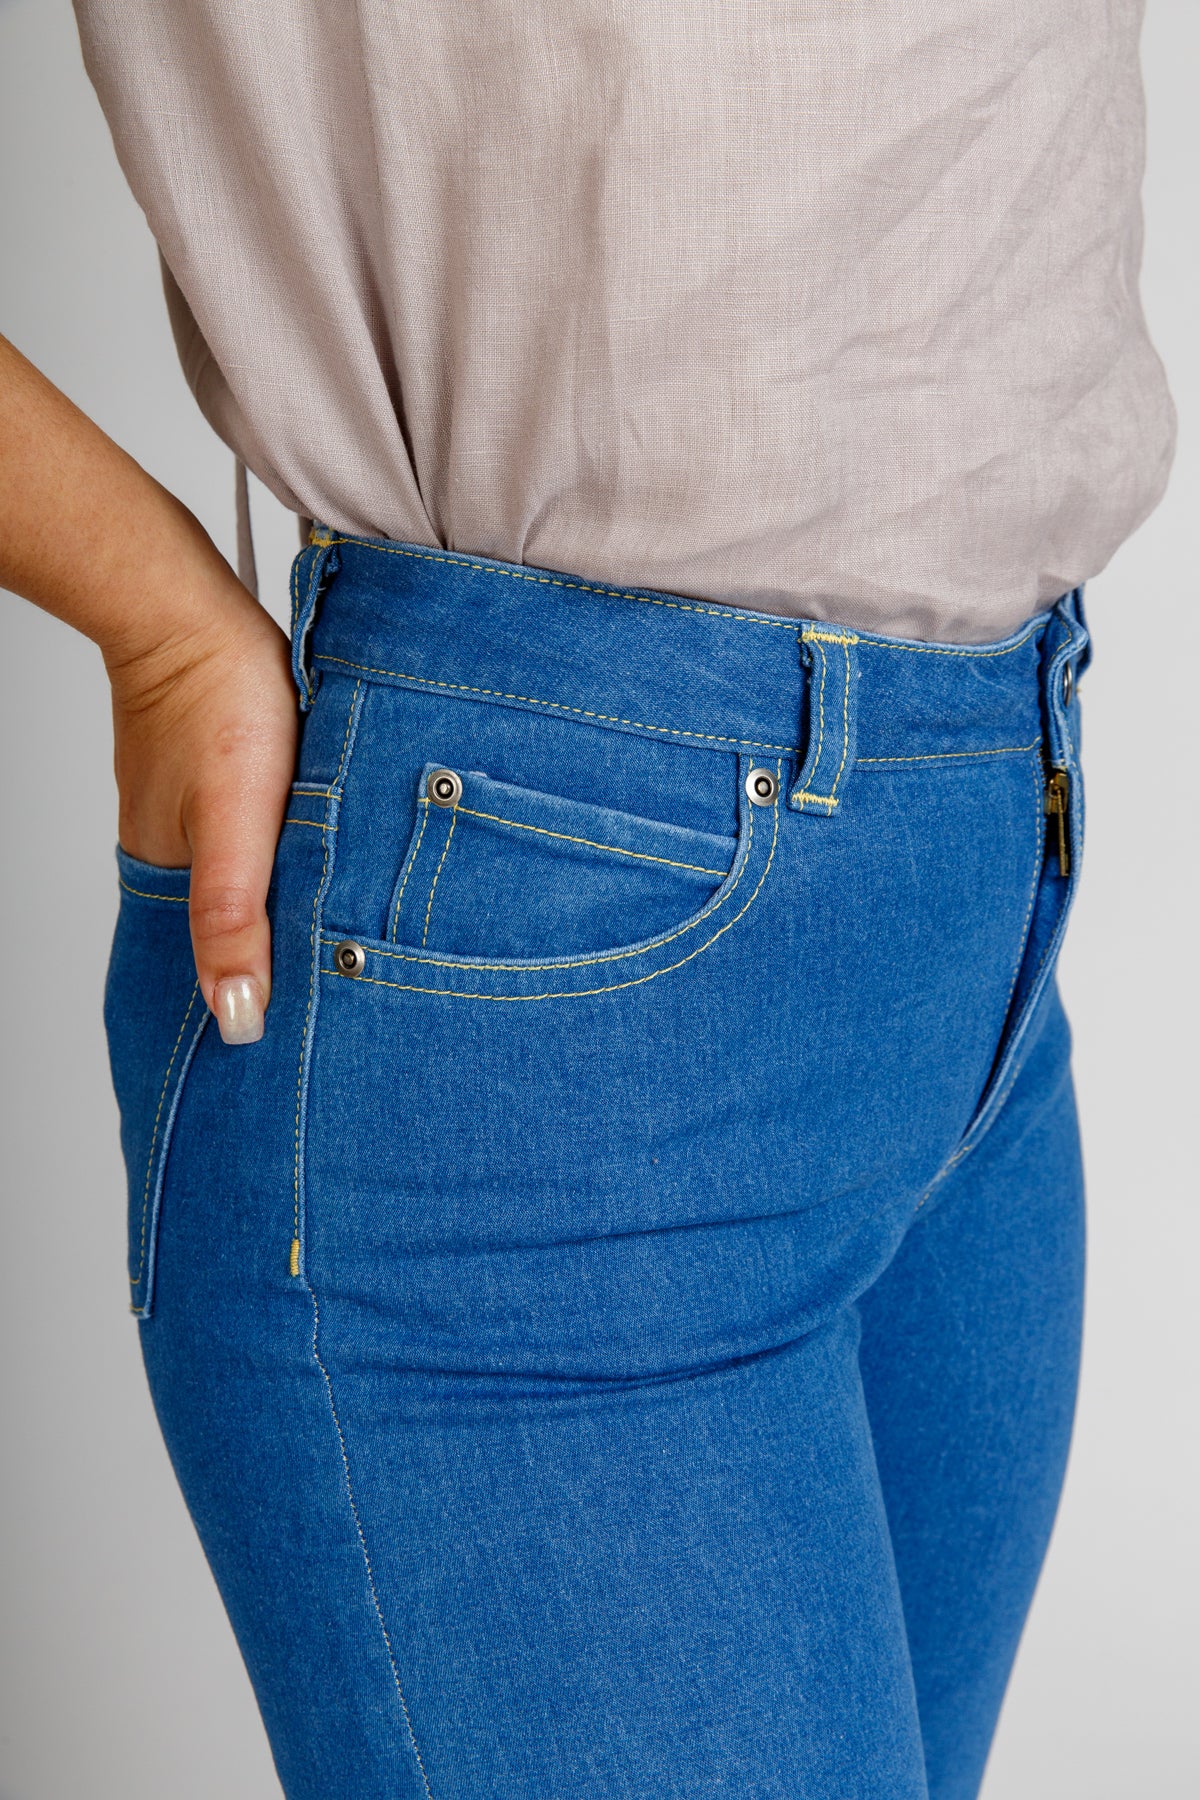 Ash Jeans (4 in 1!) - Sewing Pattern